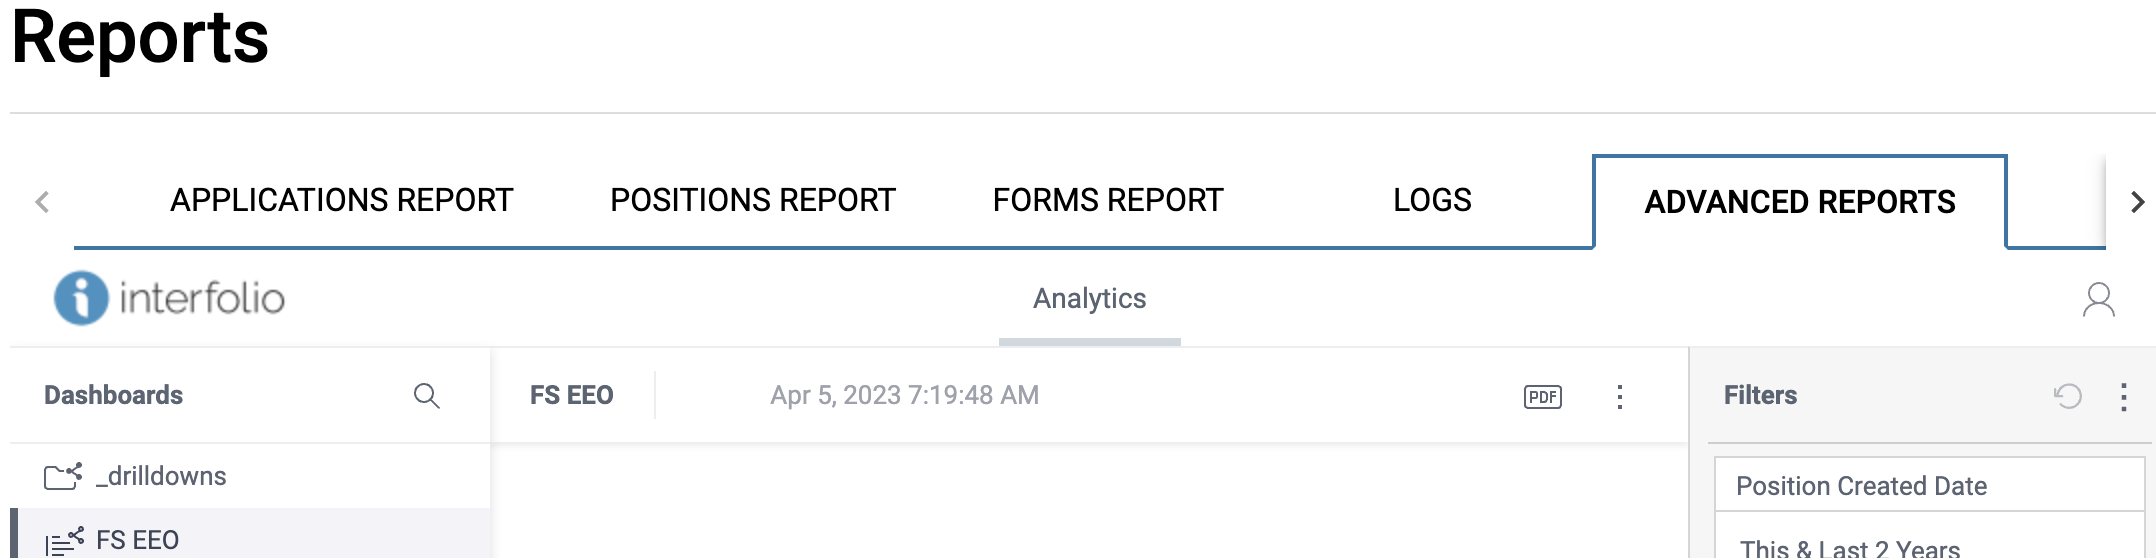 Advanced Reports tab selected adjacent to the Logs tab